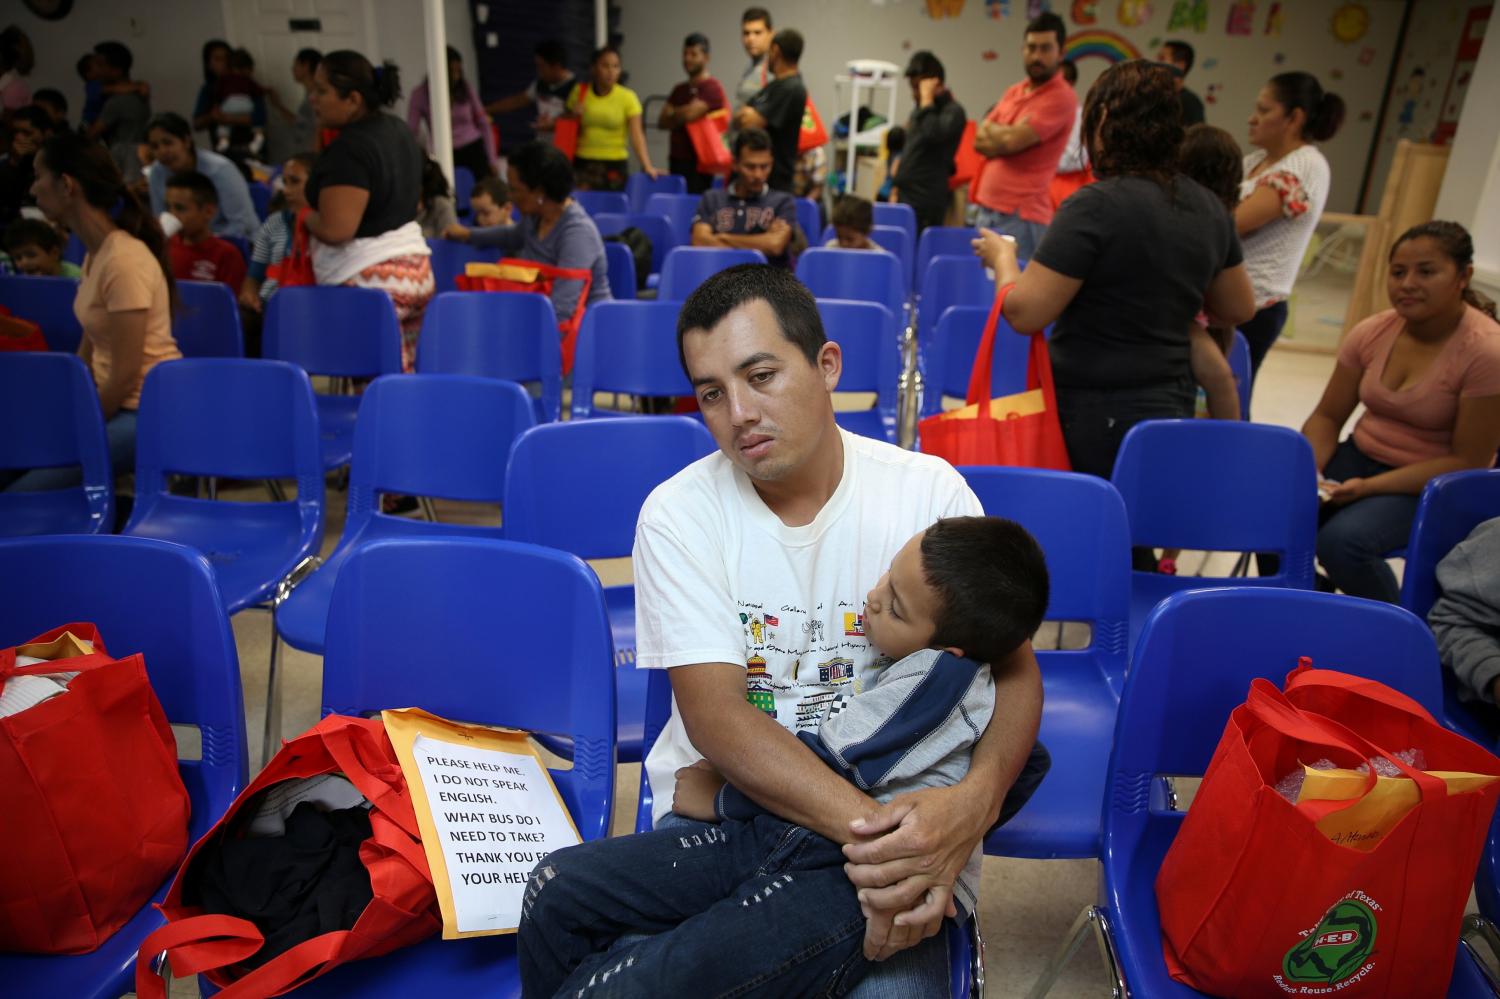 An undocumented immigrant from Honduras and his son, recently released from detention through "catch and release" immigration policy, pass the time before beginning a bus journey to Louisiana at the Catholic Charities relief center in McAllen, Texas, U.S., April 6, 2018.  REUTERS/Loren Elliott - RC1B544F5750